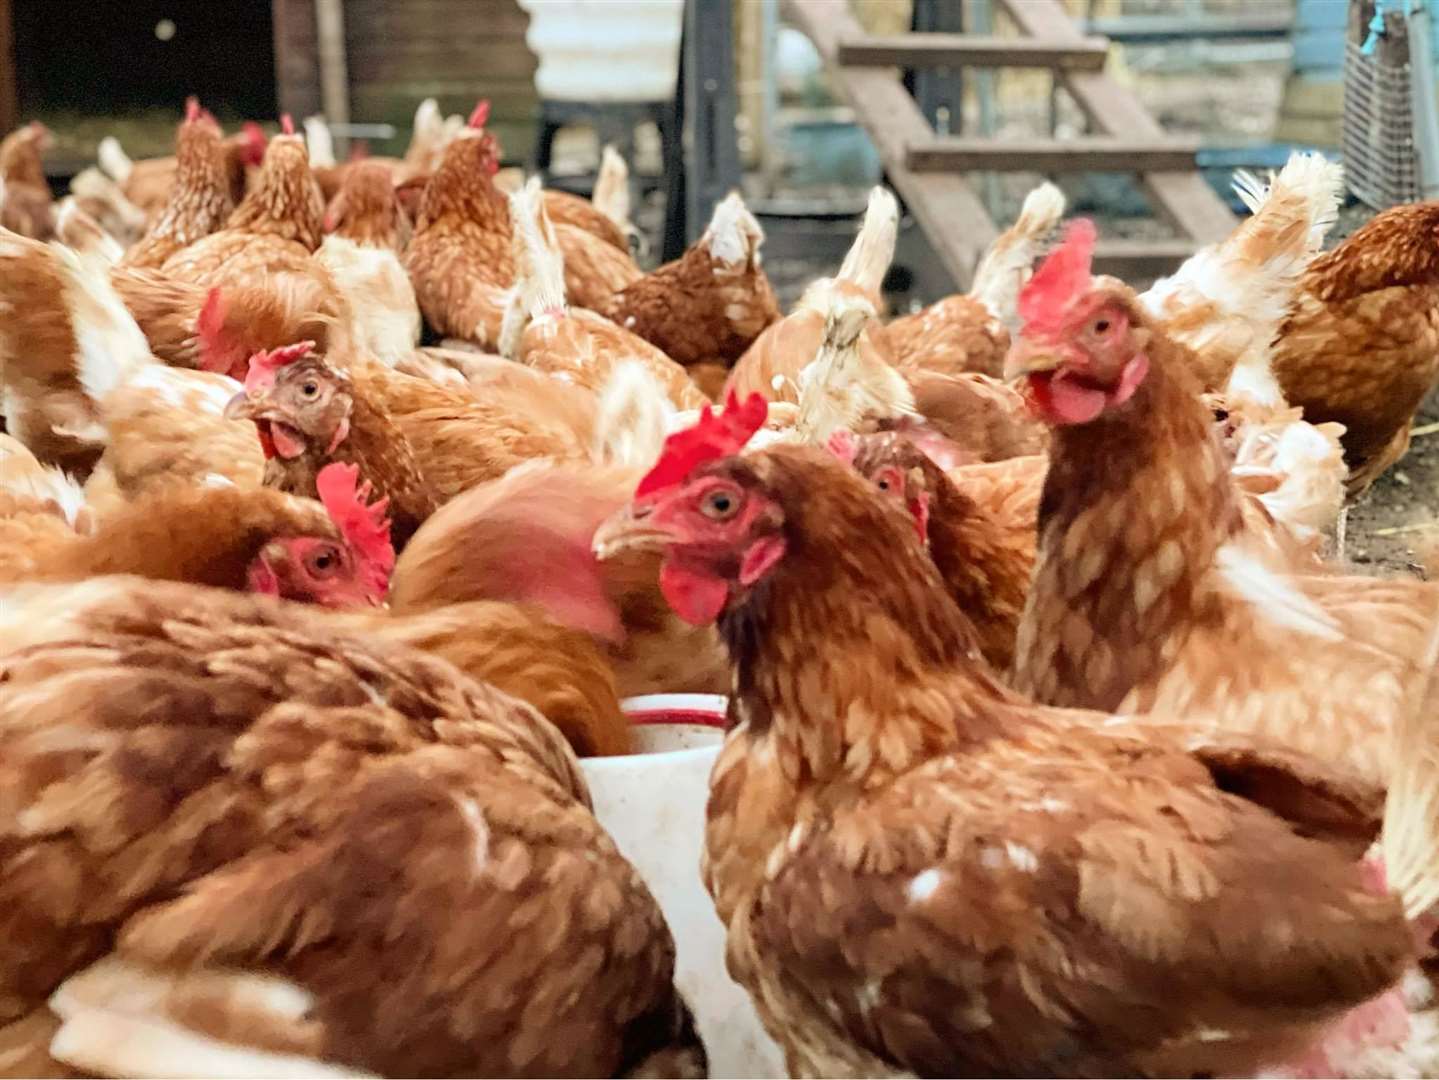 The Happy Pants Ranch at Bobbing has taken in 70 hens to save them from being killed